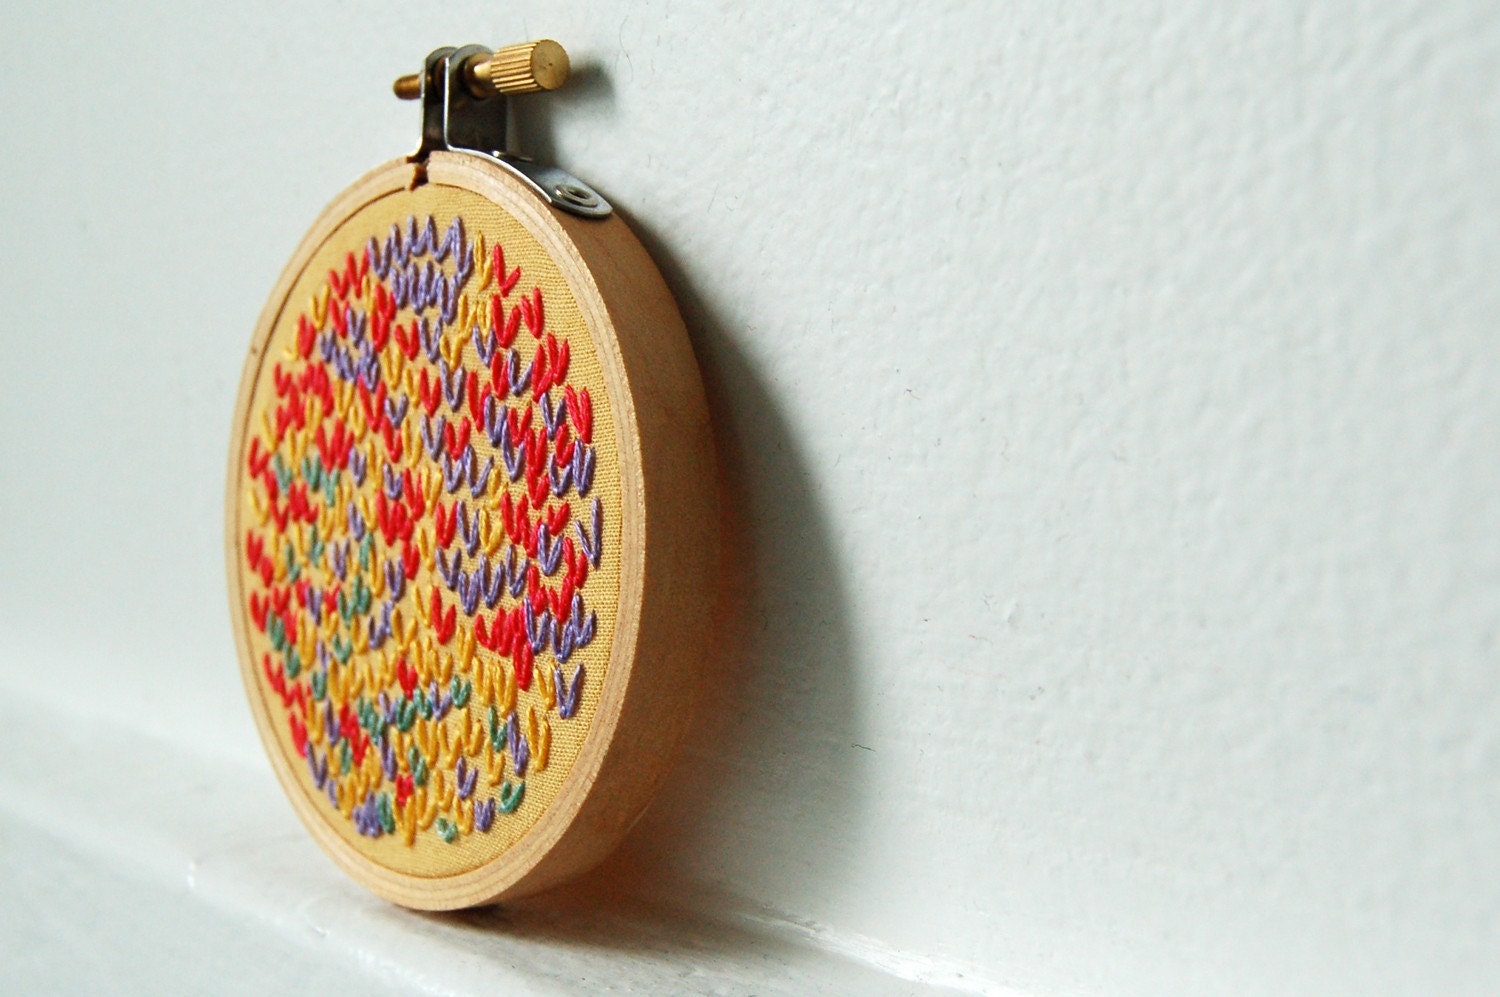 Hand Embroidery in 3 inch Hoop. Orange, Purple, Yellow. Wishbone Stitch Color Circle. West Coast Sun. Handmade by Merriweathercouncil on Etsy